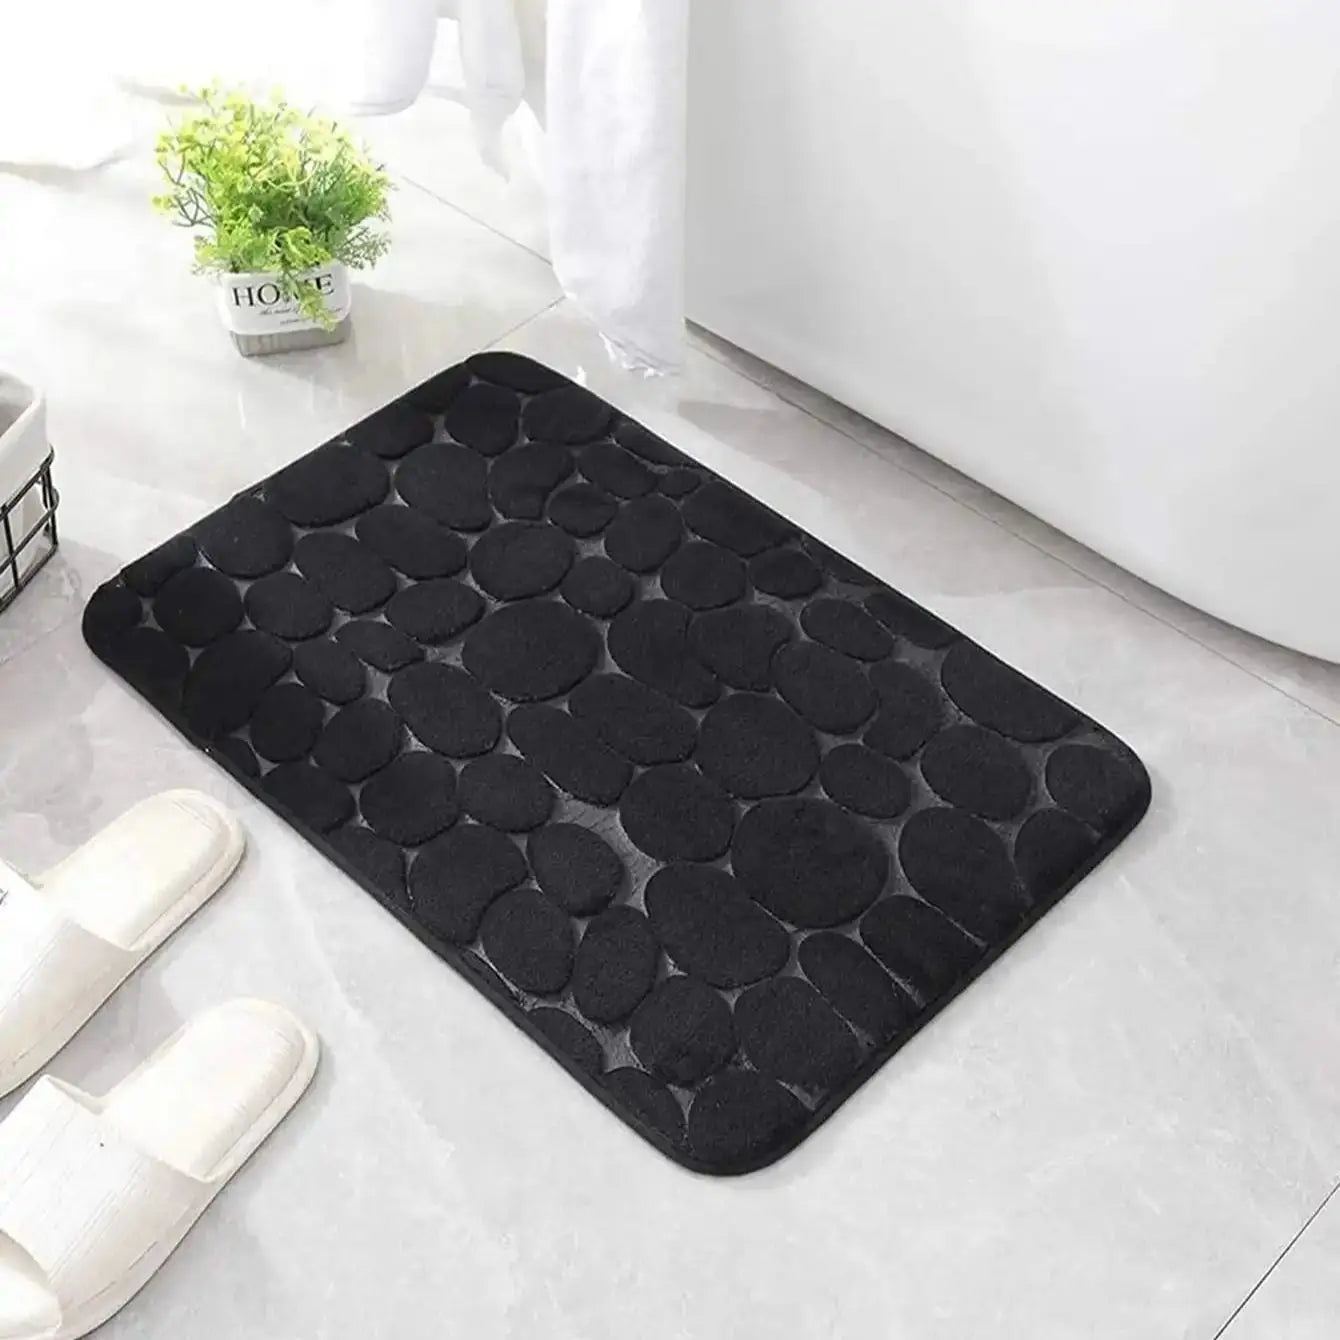 1pc Cobblestone Bath Mat - Stone Textured, Rapid Water Absorbent, Non-Slip, Washable, Thick Soft Comfortable Carpet for Bathroom